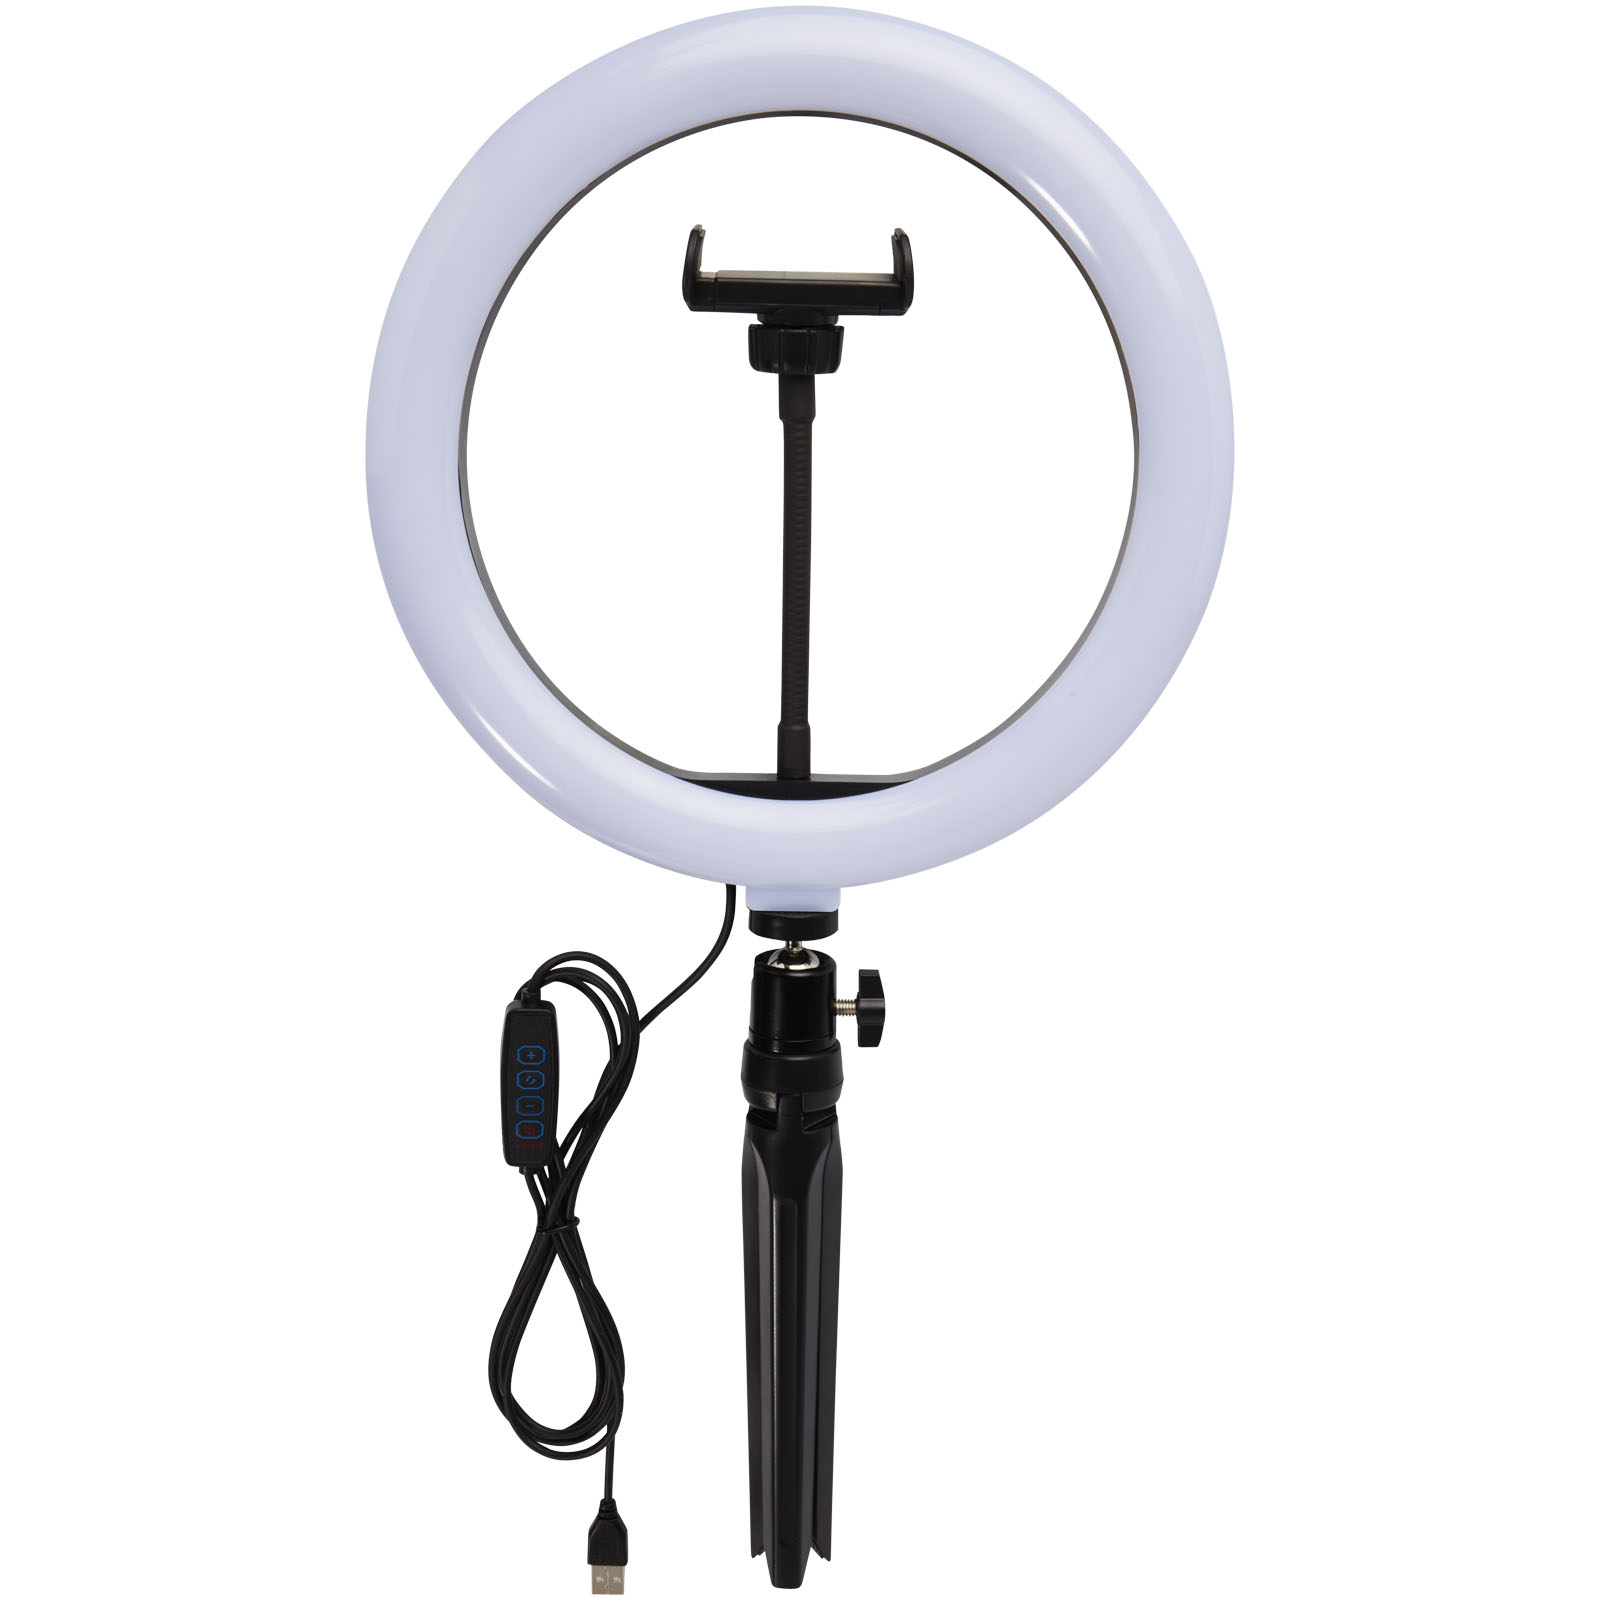 Advertising Telephone & Tablet Accessories - Studio ring light for selfies and vlogging with phone holder and tripod - 2